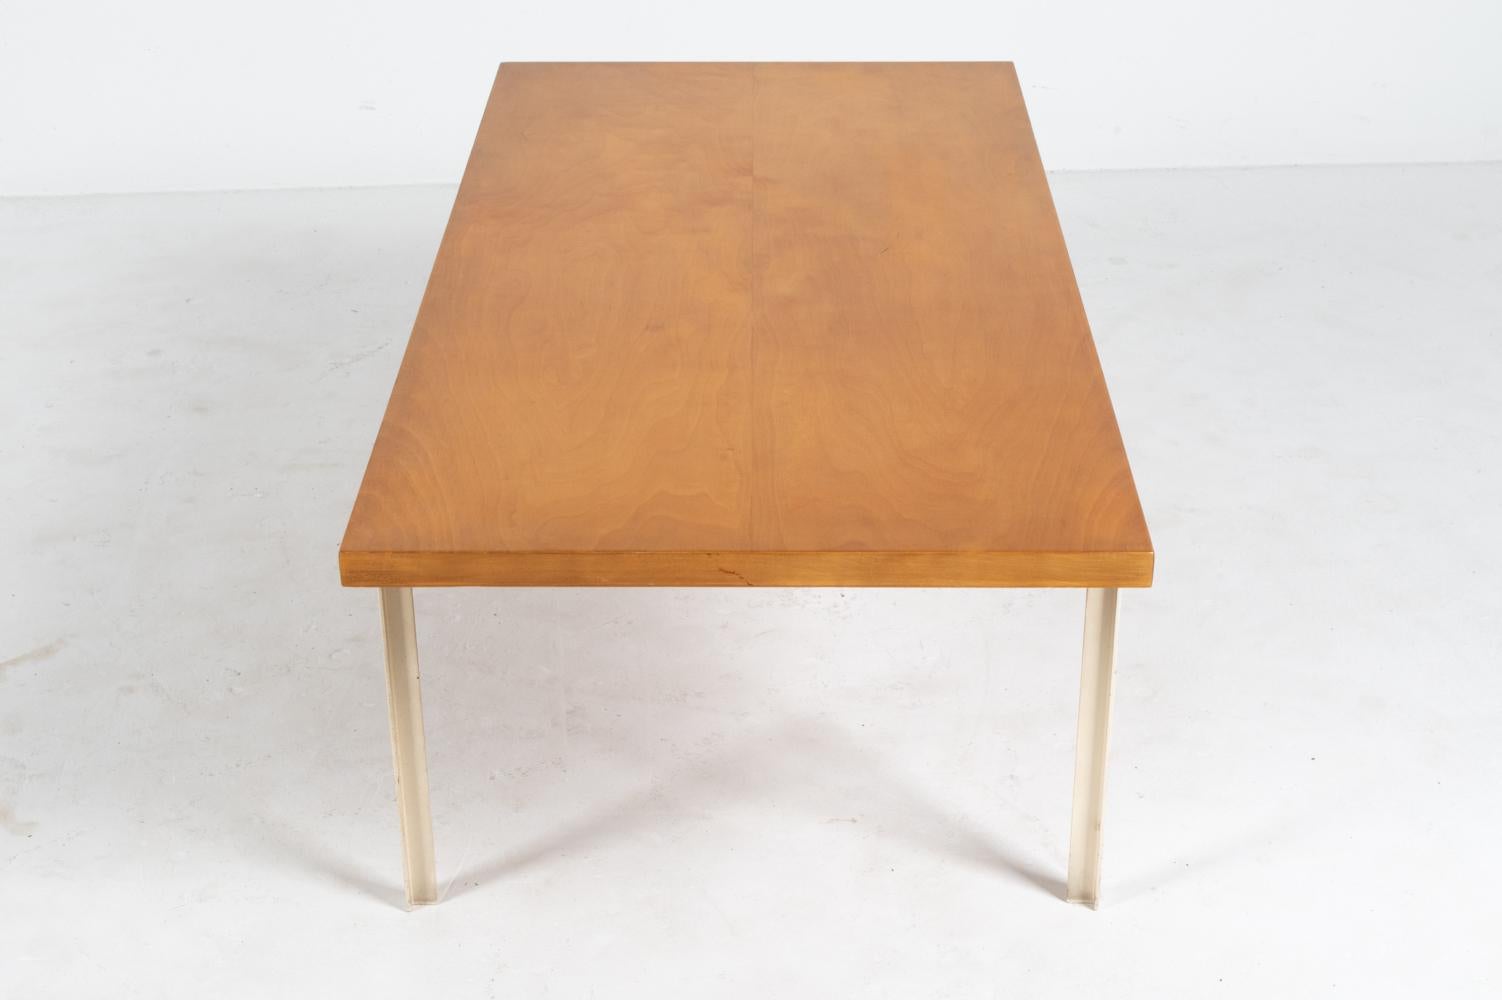 Rare Florence Knoll T-Angle Coffee Table in Birch; Knoll International c. 1960's For Sale 1